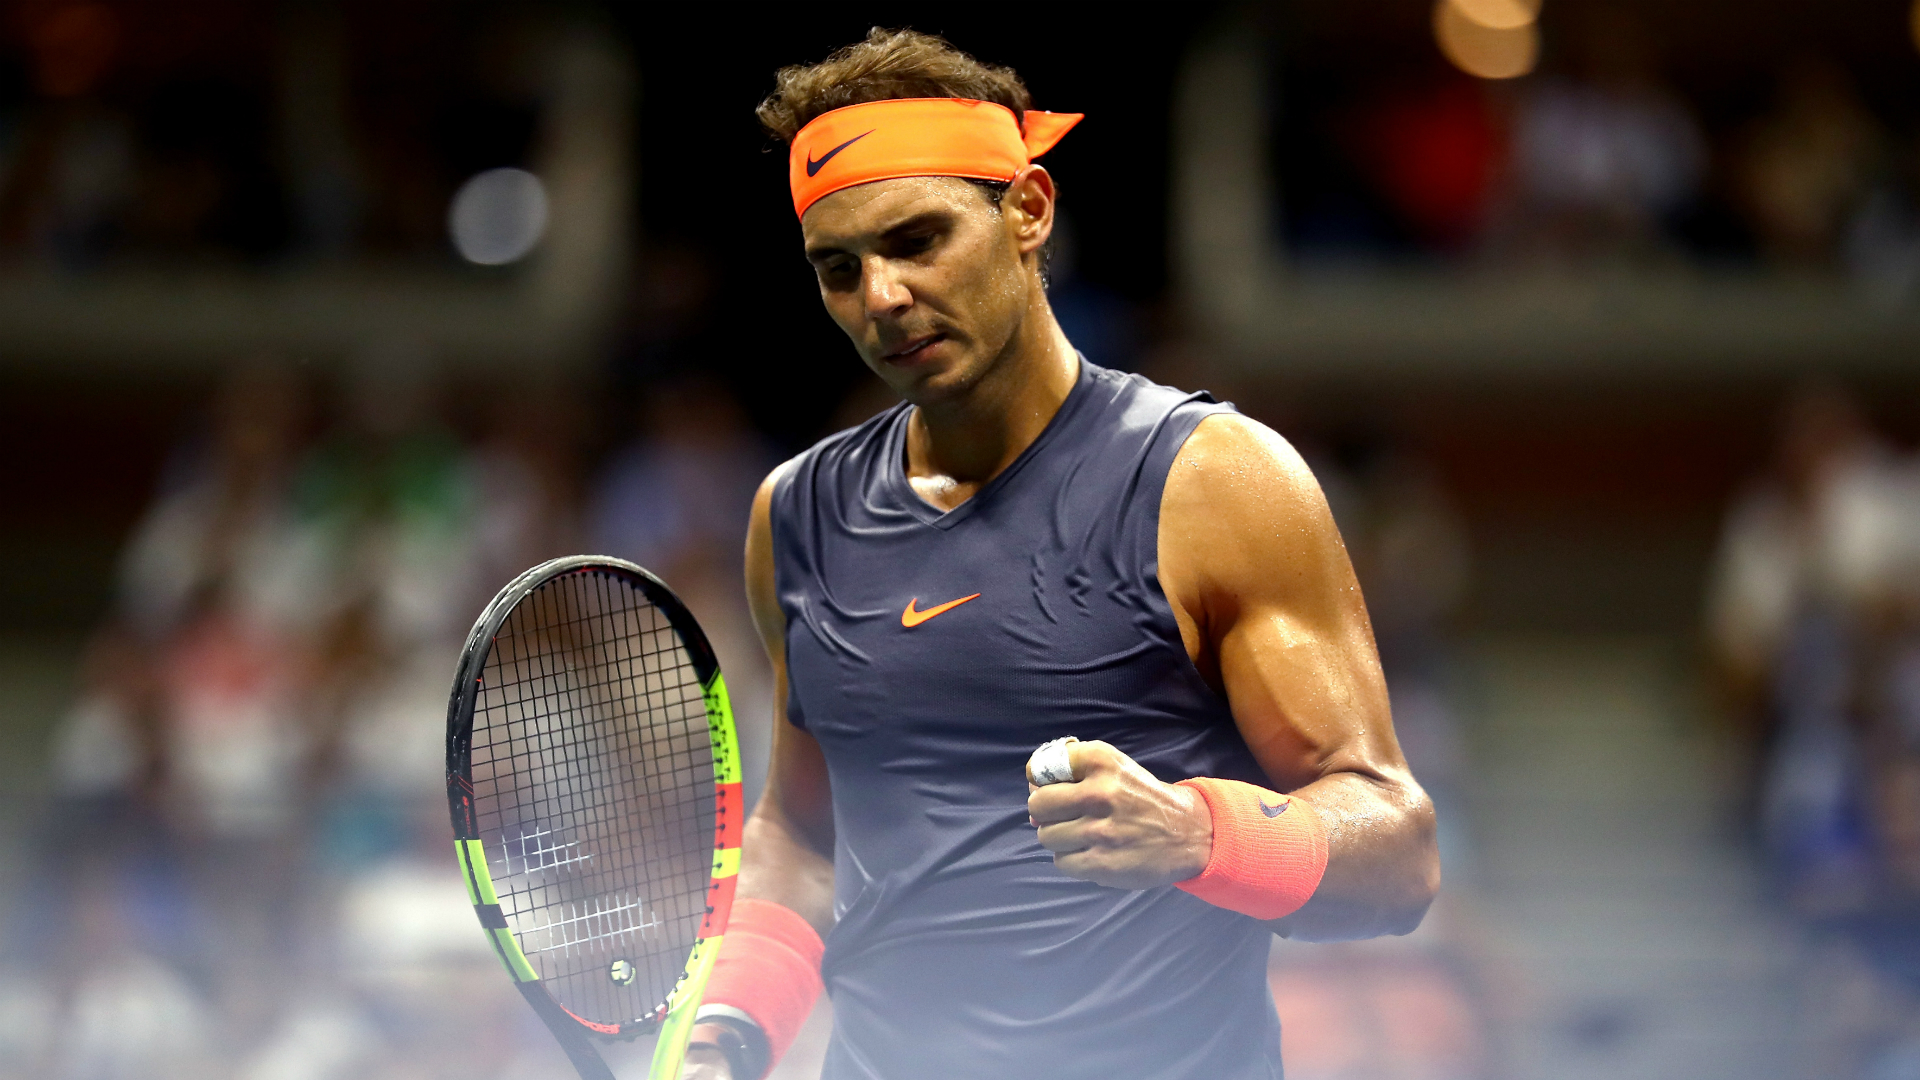 Nadal outlasts Thiem in US Open classic to reach semis | Sporting News1920 x 1080